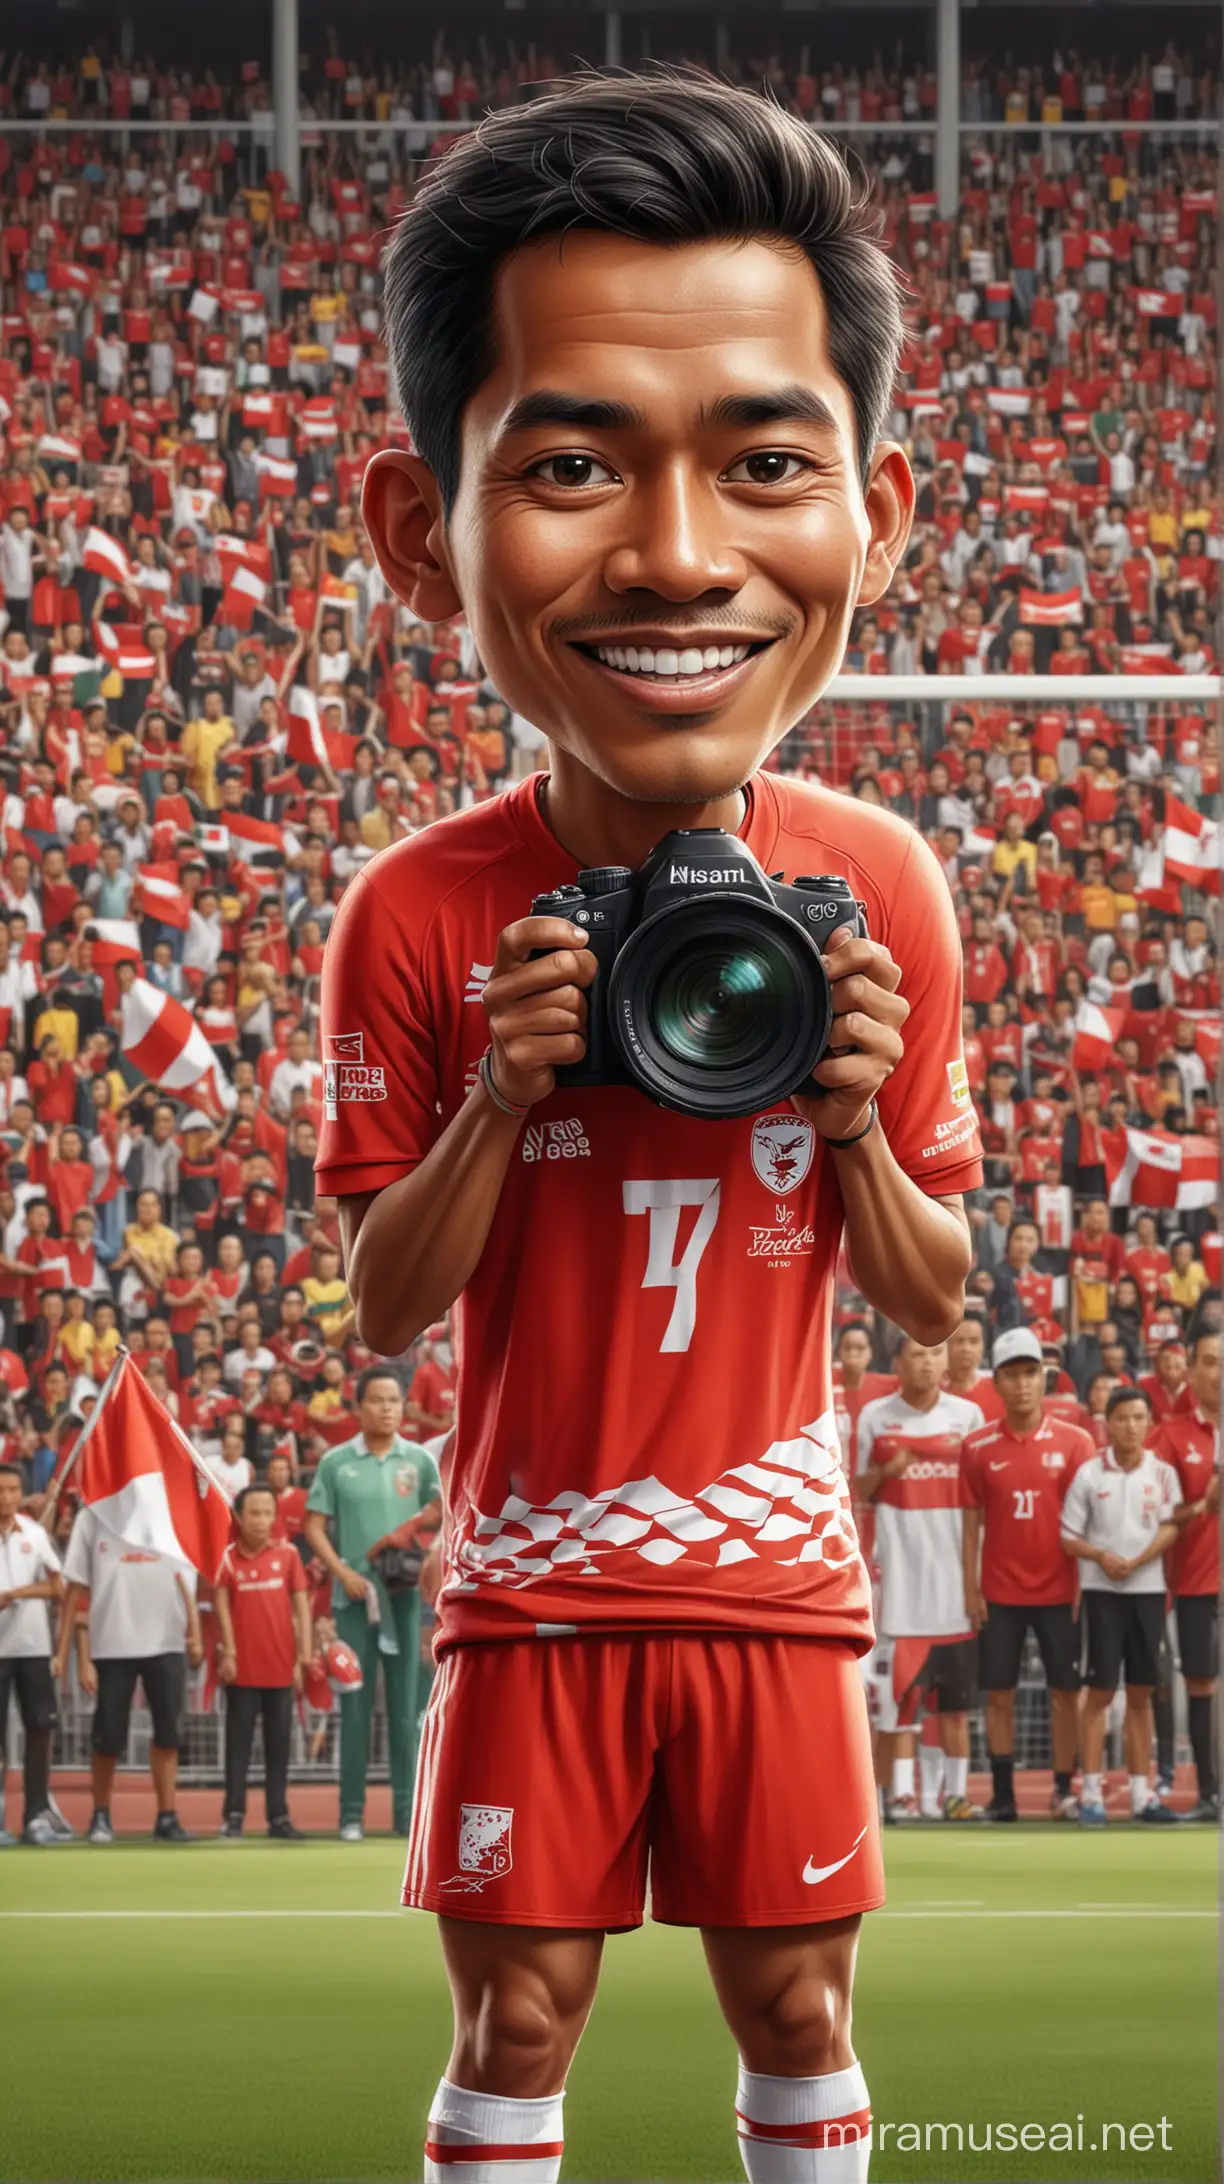 Indonesian Football Fan with Camera at Stadium